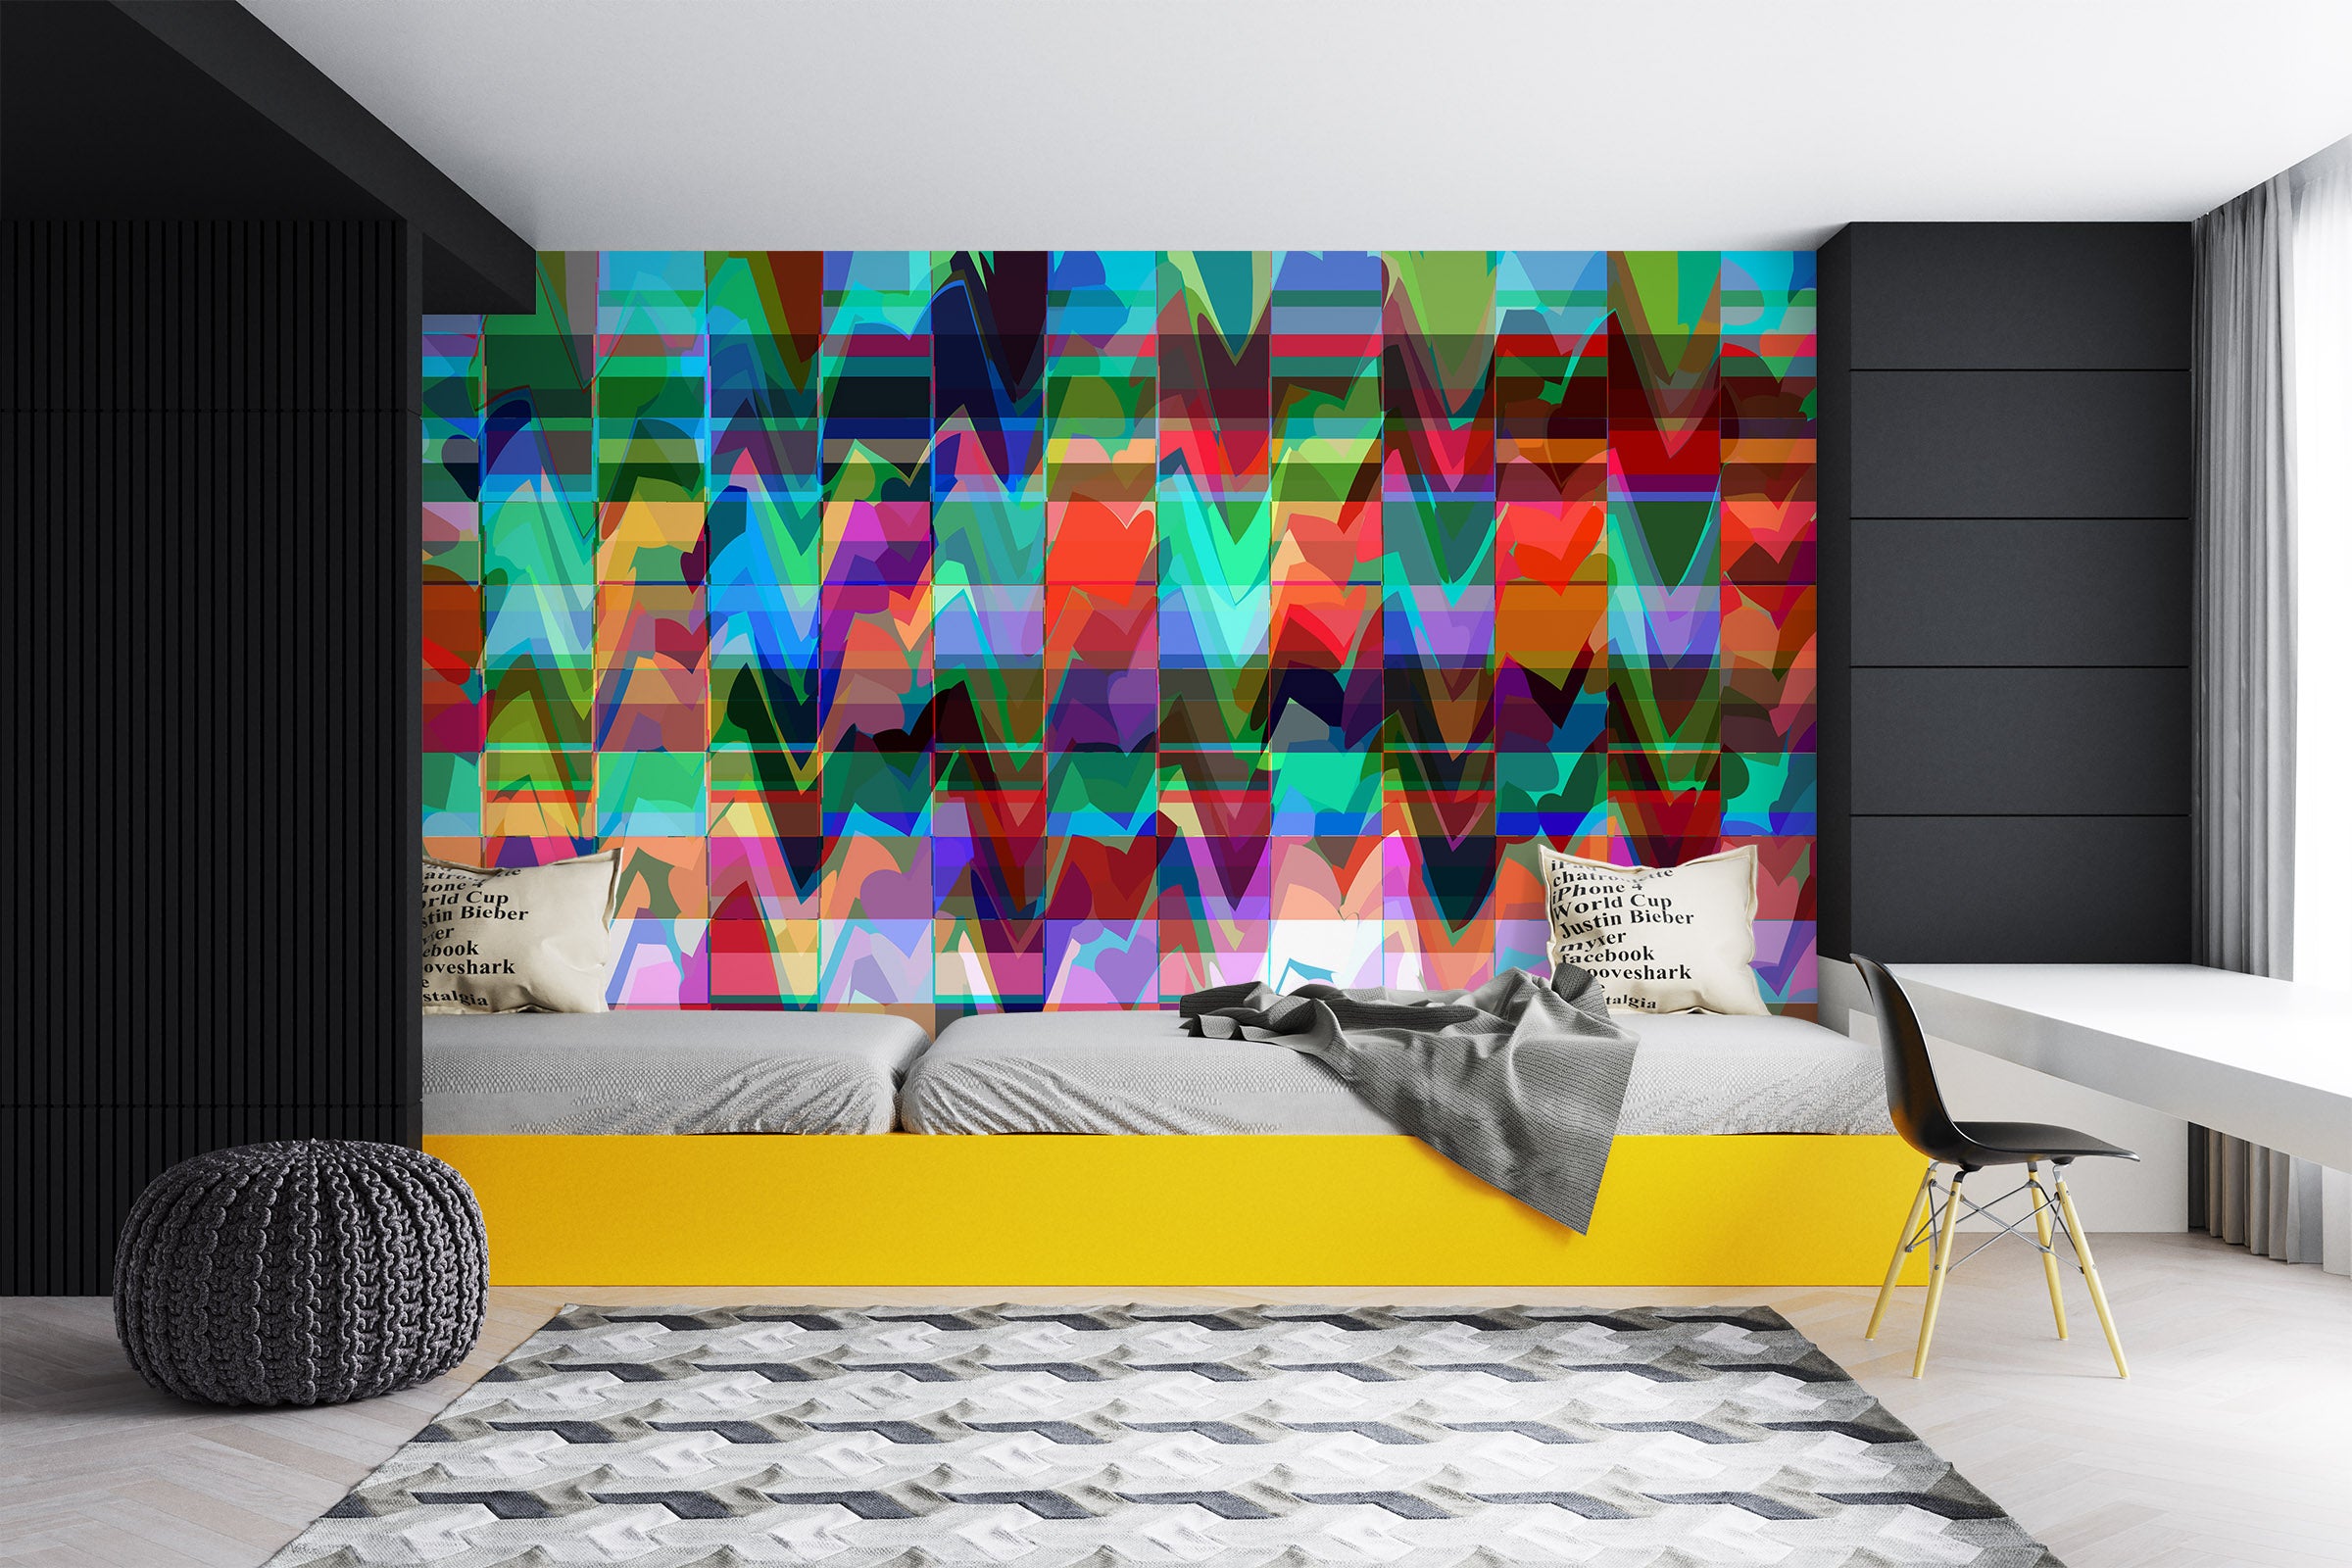 3D Color Wave Pattern 70117 Shandra Smith Wall Mural Wall Murals